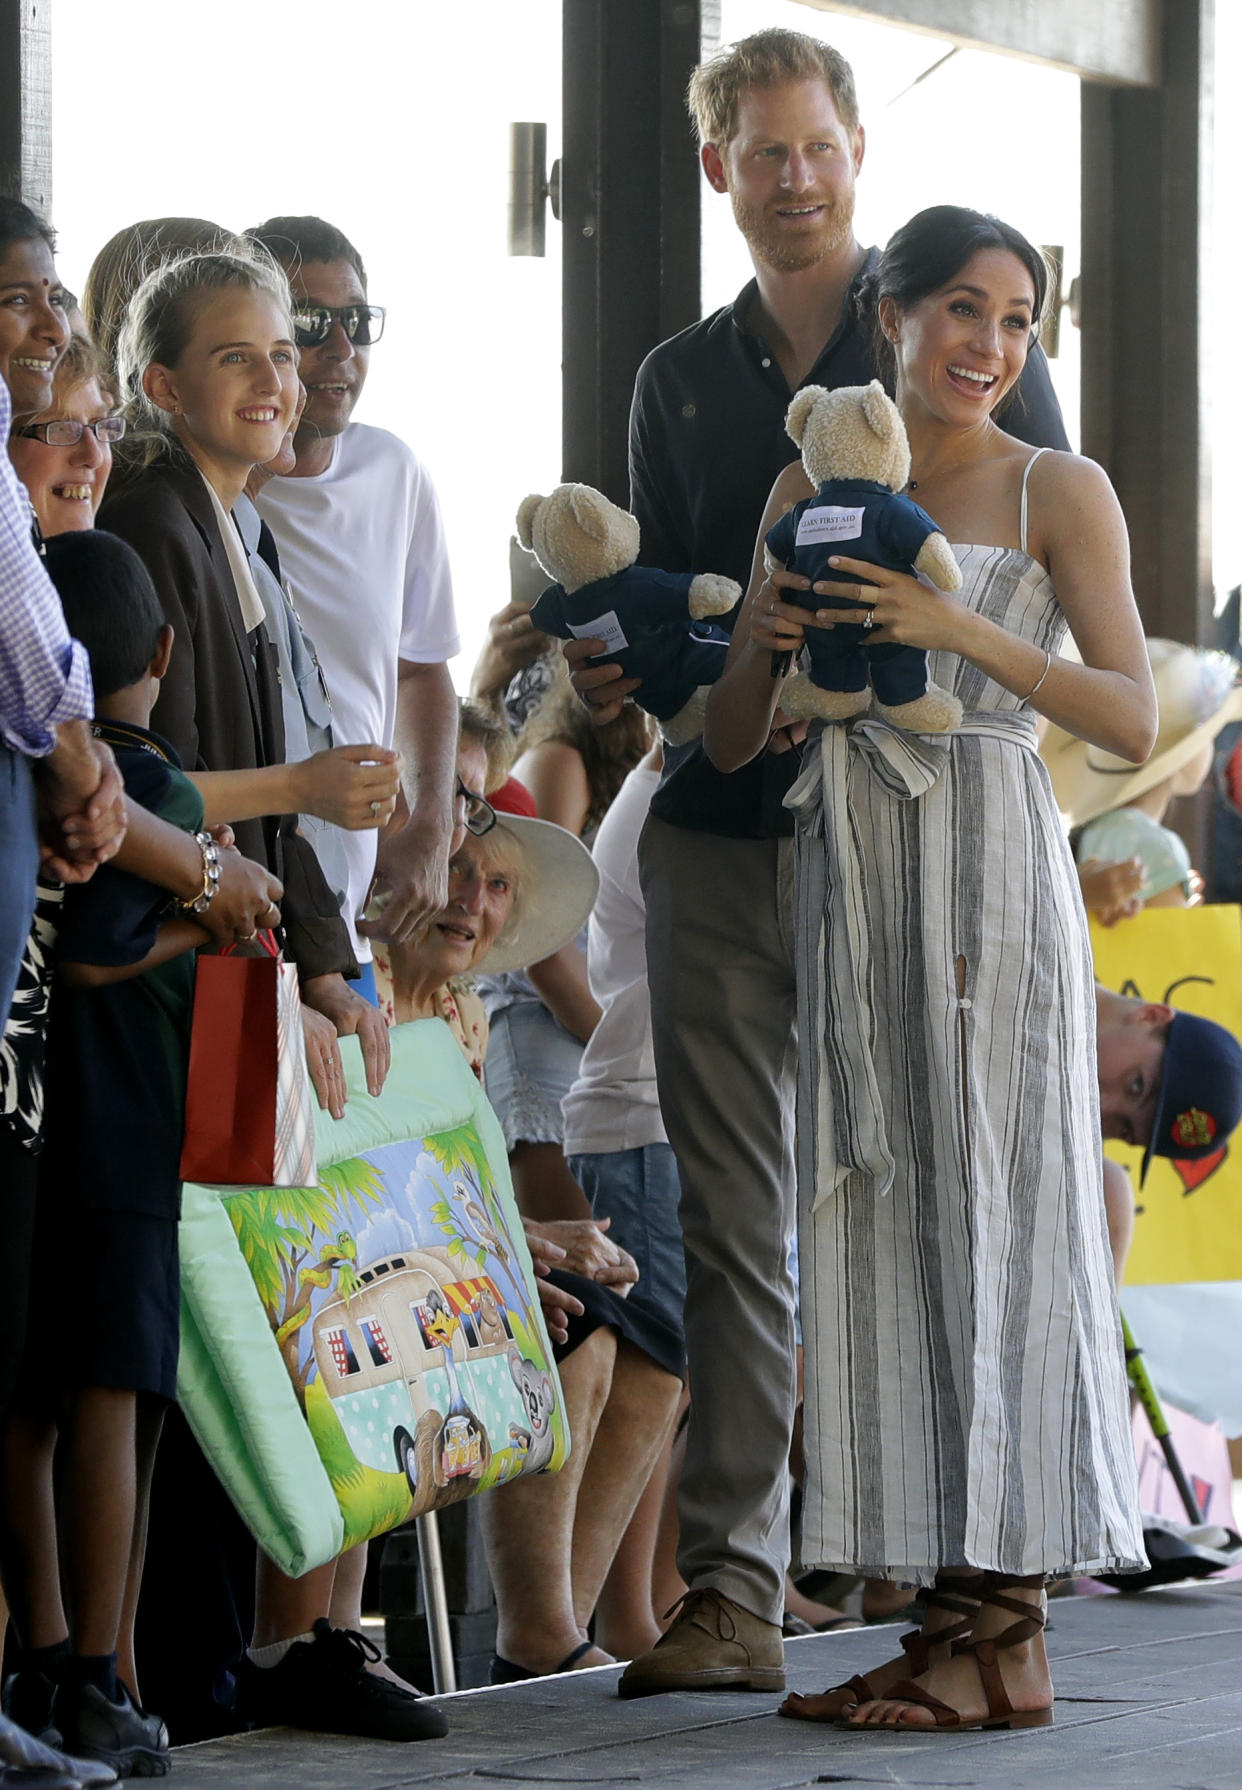 Britain's Prince Harry, second from right, and Meghan, Duchess of Sussex receive gifts from the crowd as they walk along Kingfisher Bay Jetty during a visit to Fraser Island, Australia, Monday, Oct. 22, 2018. Prince Harry and his wife Meghan are on day seven of their 16-day tour of Australia and the South Pacific. (AP Photo/Kirsty Wigglesworth, Pool)